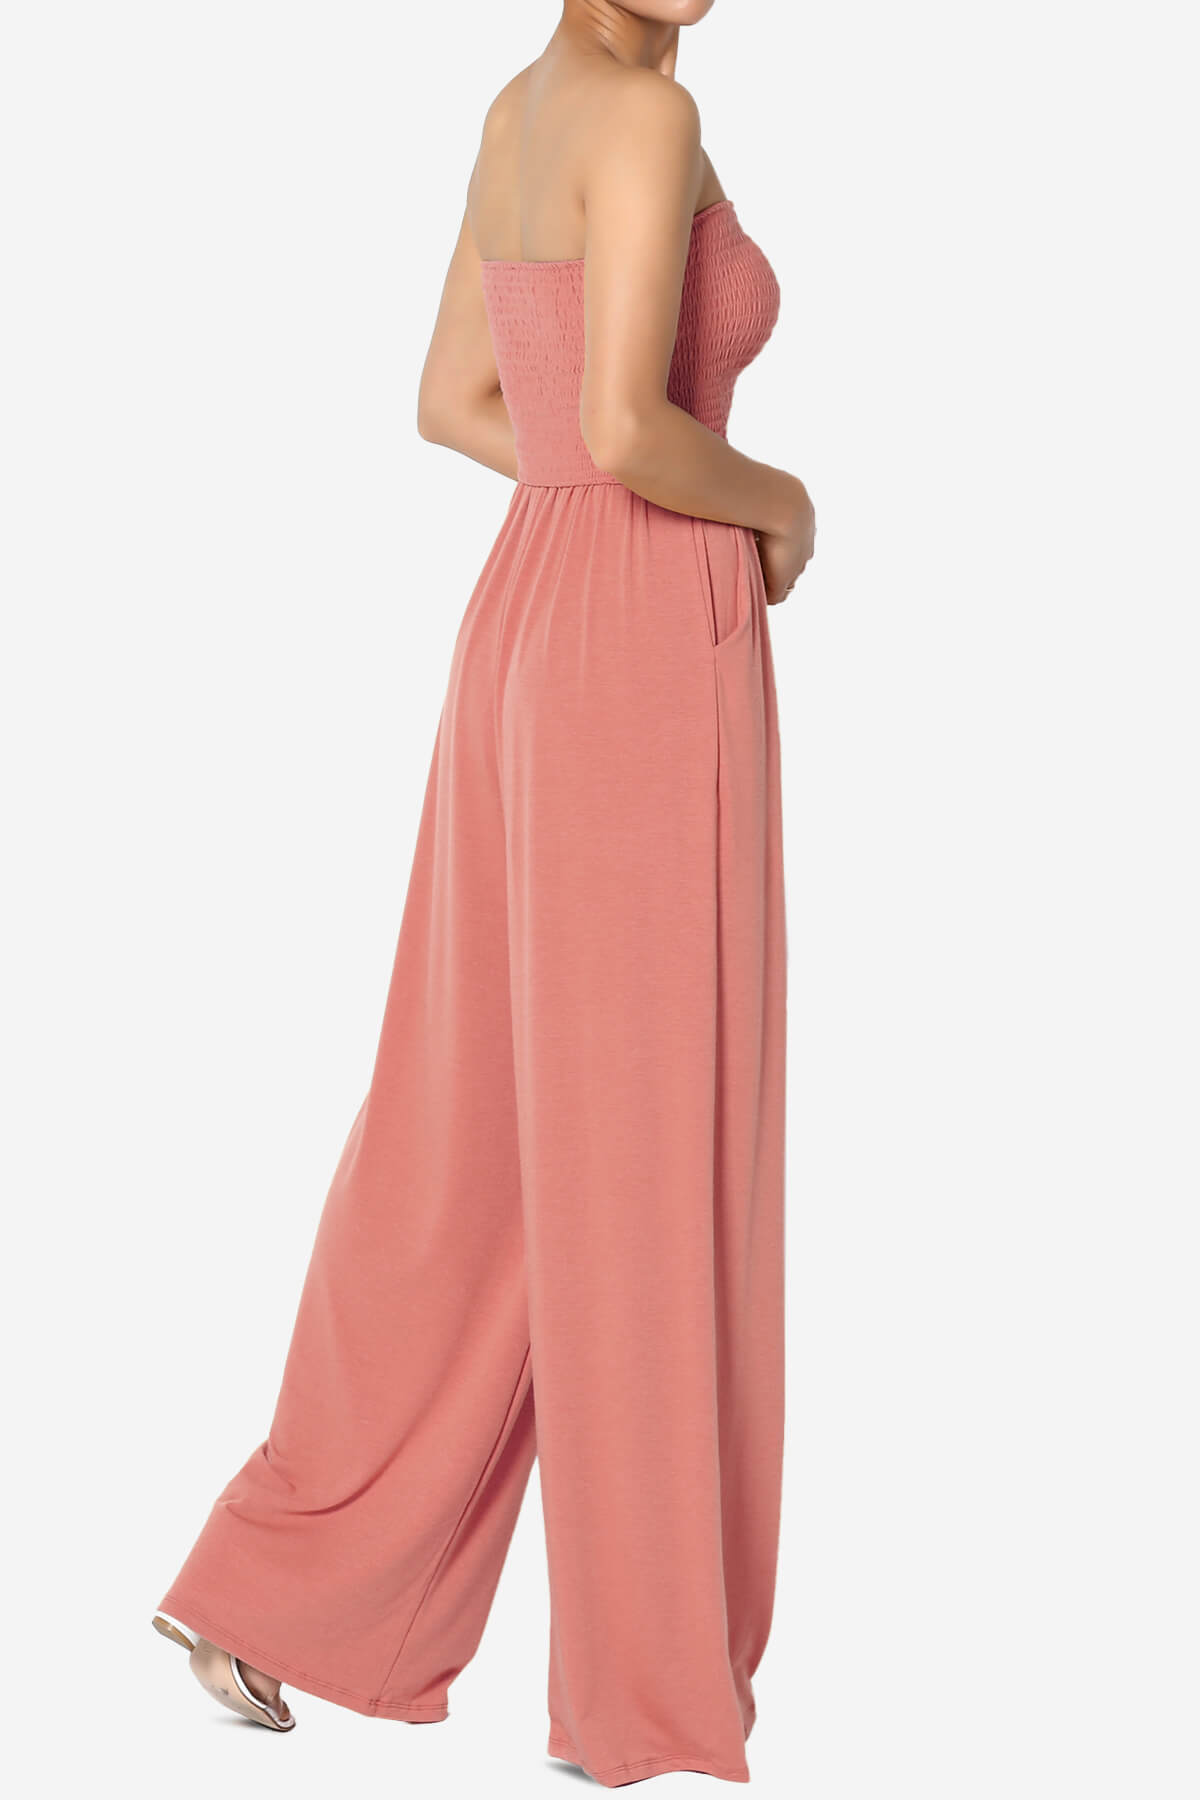 Strapless Pink Jumpsuit Forever 21 Size Small | eBay